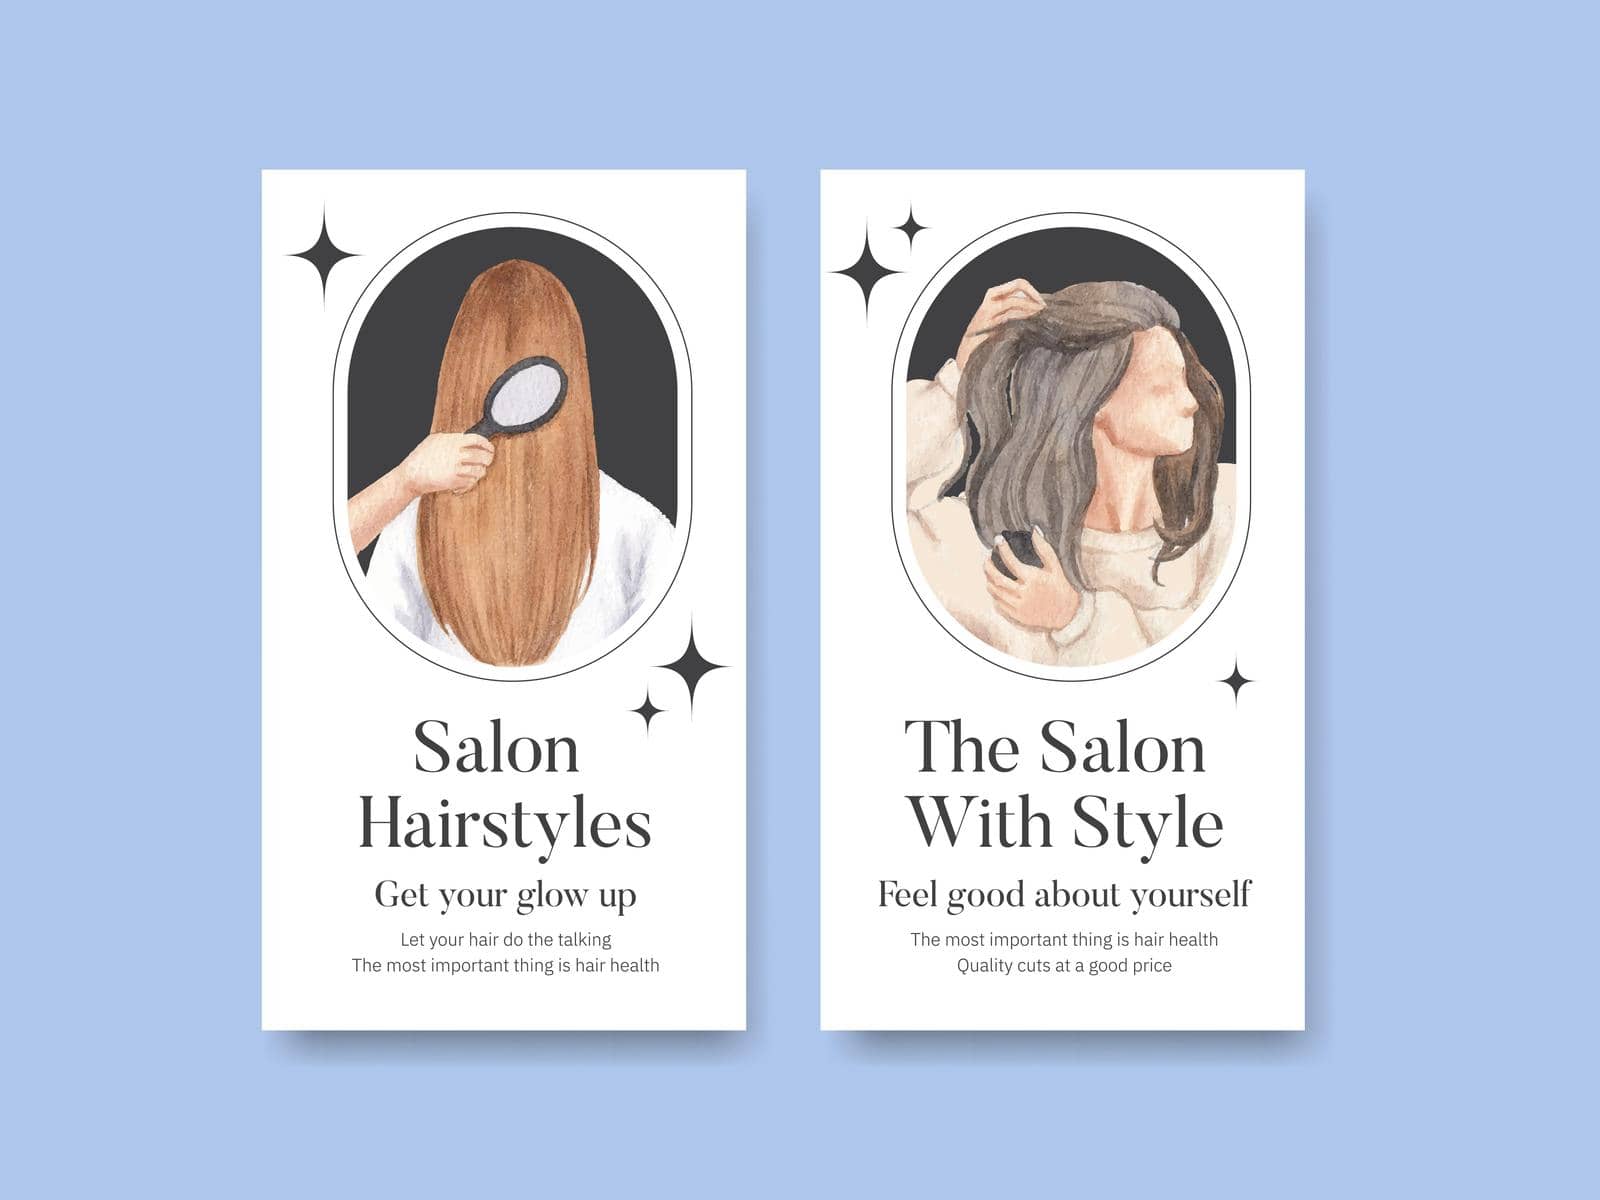 Instagram template with salon hair beauty concept,watercolor style by Photographeeasia